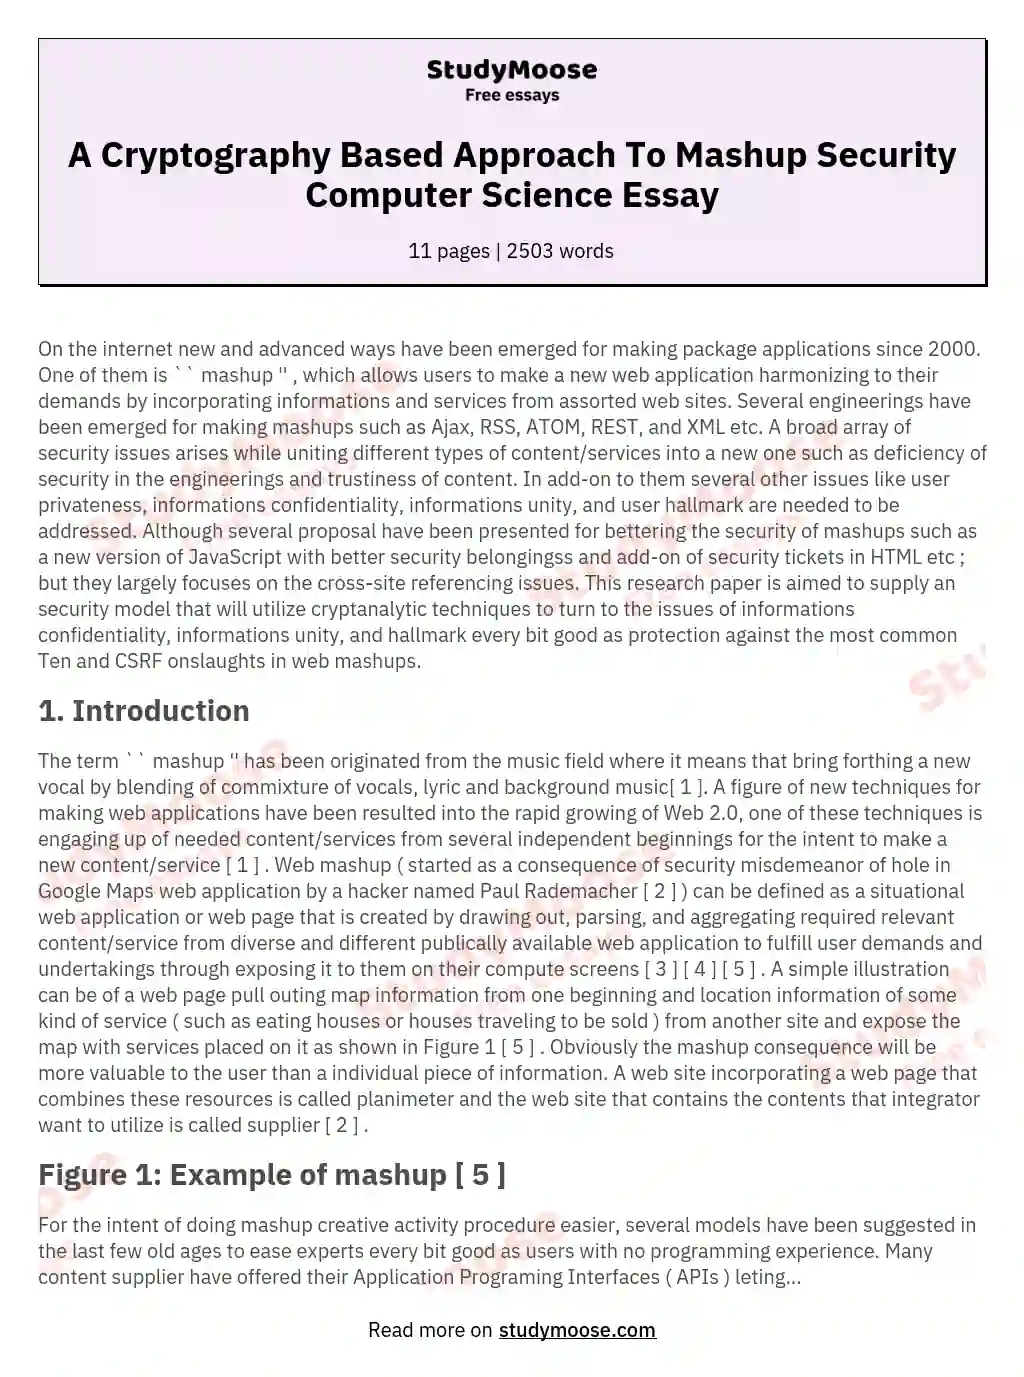 A Cryptography Based Approach To Mashup Security Computer Science Essay essay